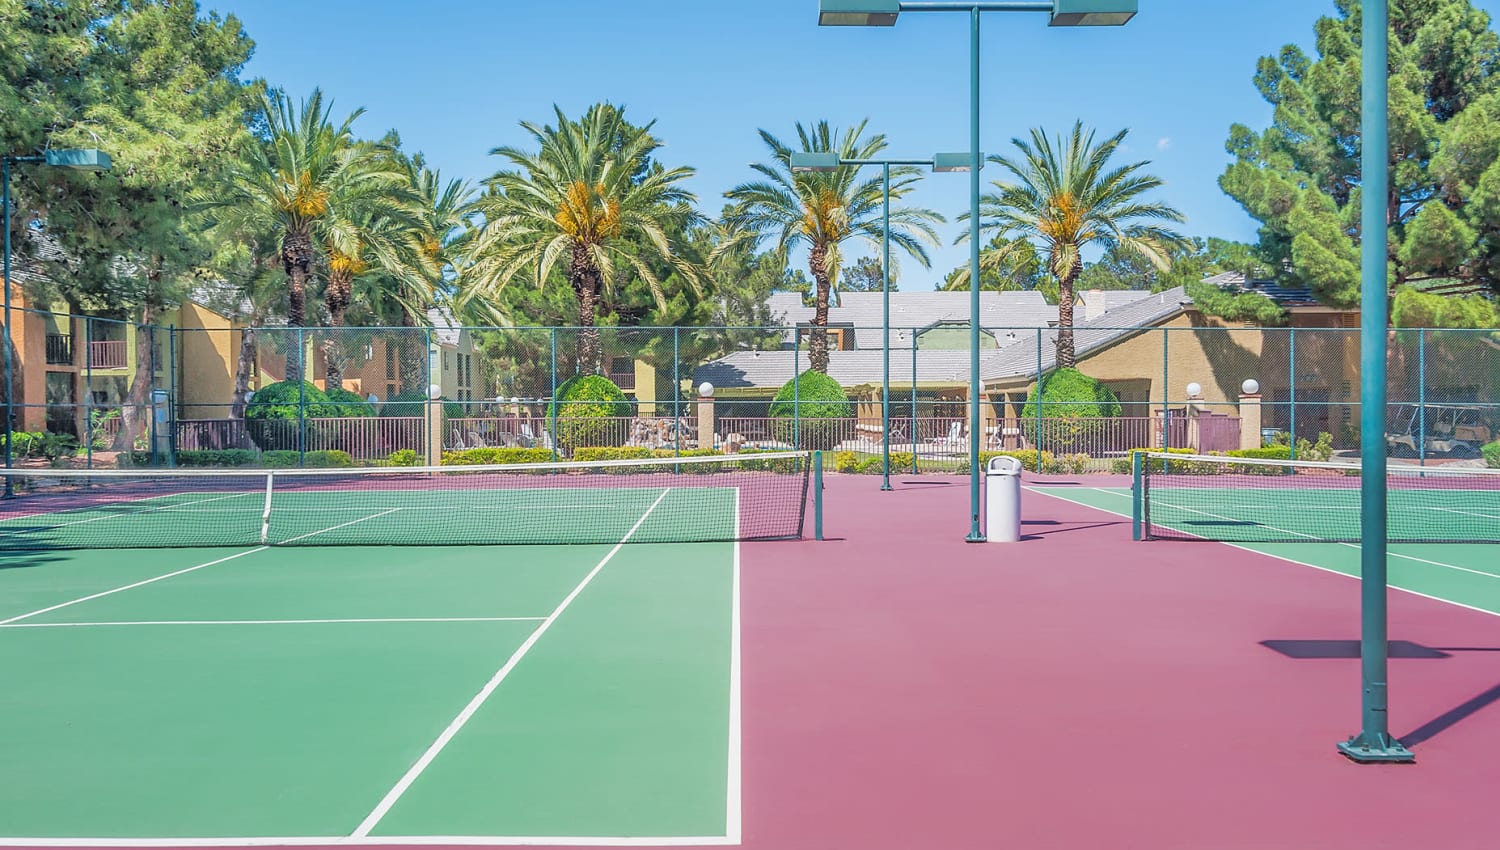 Palm trees around the tennis courts at Shelter Cove Apartments in Las Vegas, Nevada